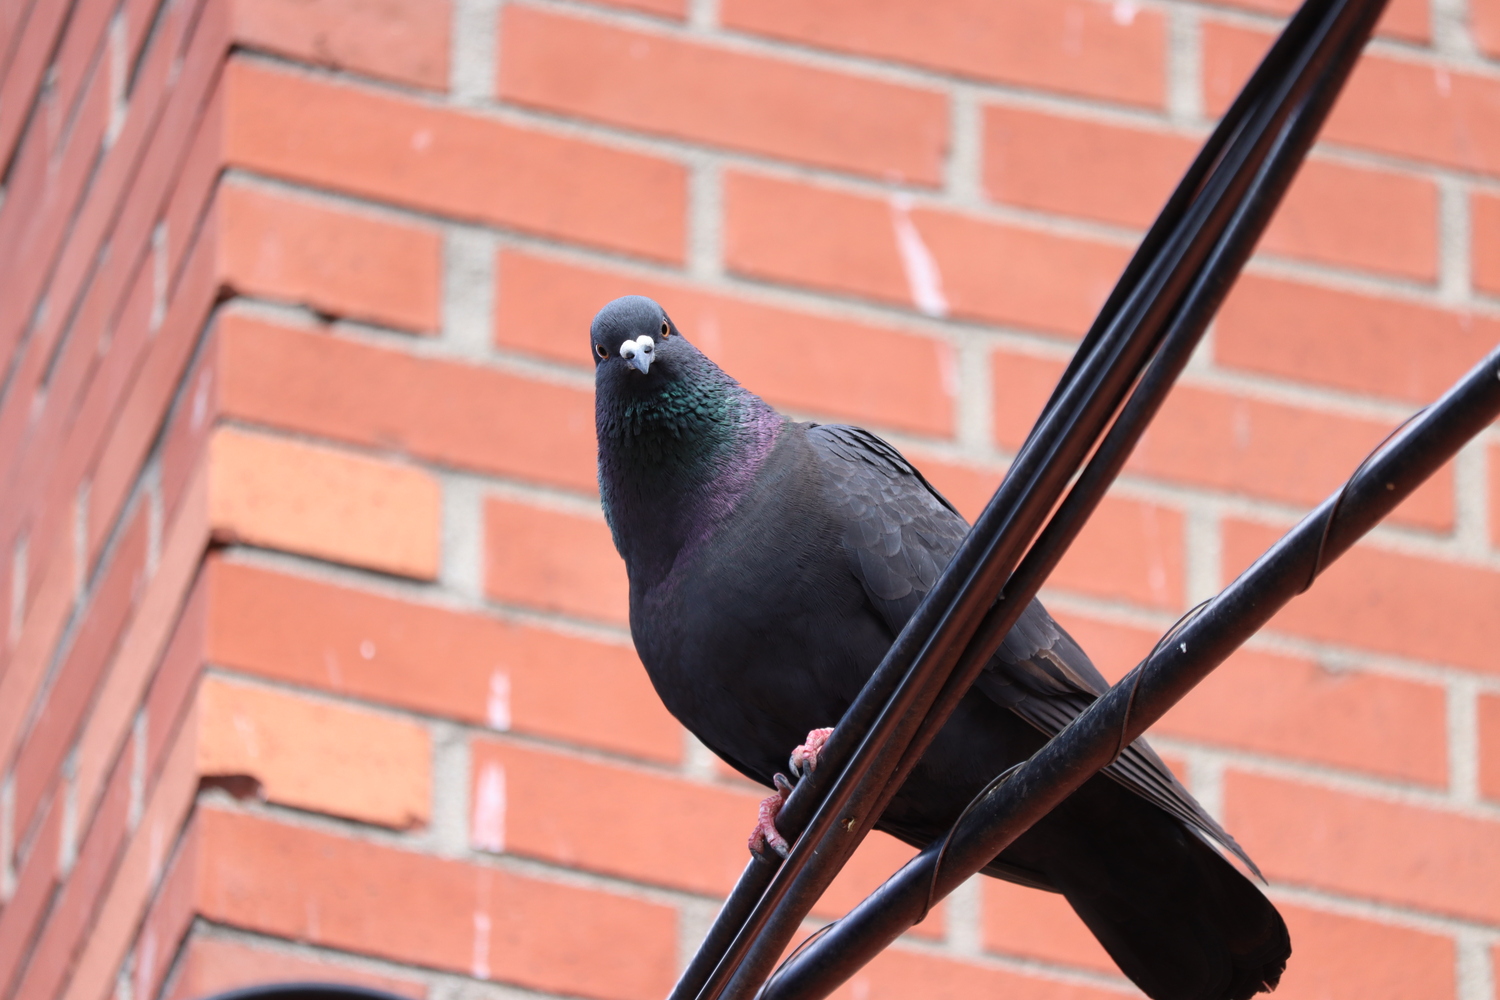 a standard issue city pigeon
on a telephone cable
in front of a brick wall,
looking directly at the camera.